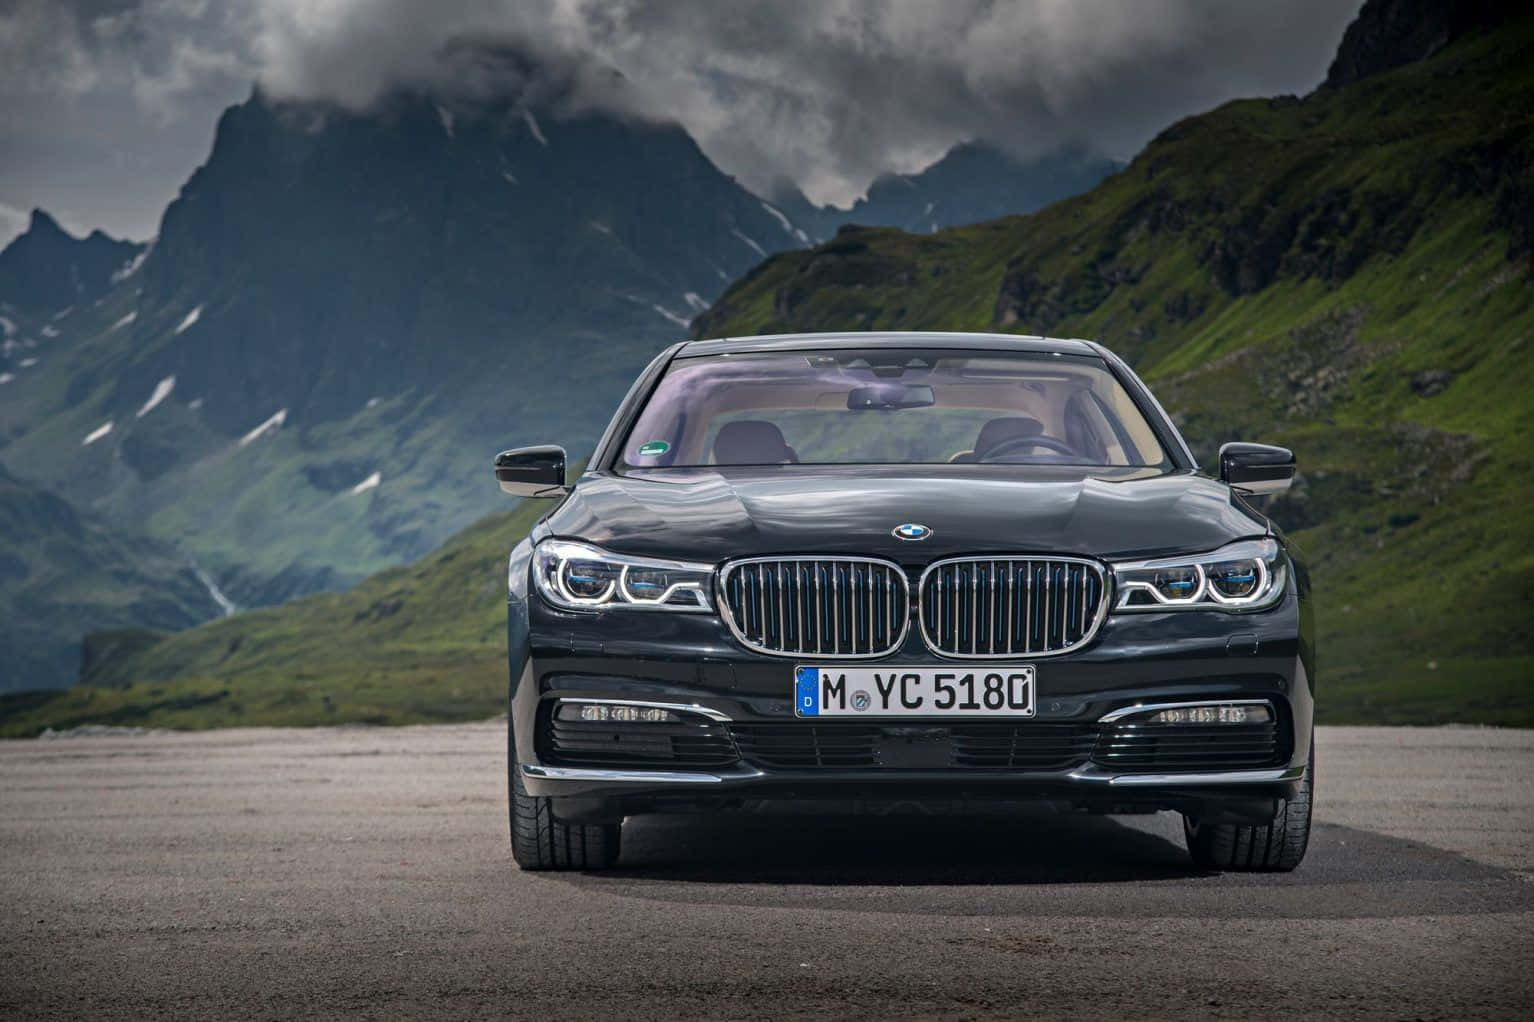 Sleek and stylish BMW 7 Series in motion Wallpaper